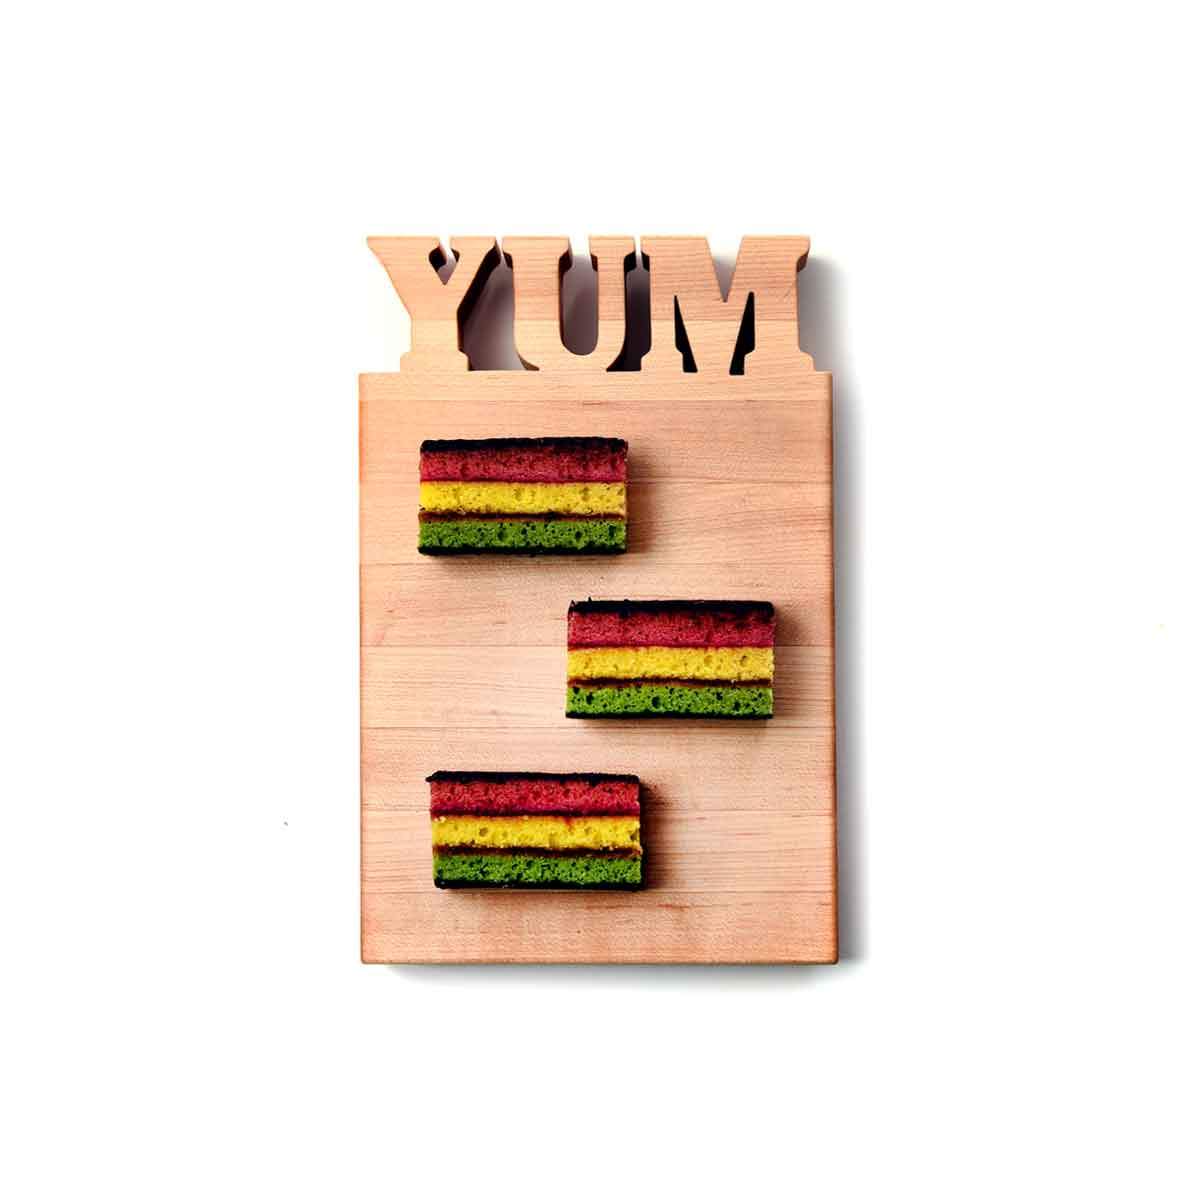 cute cutting board sayings- this one has YUM cut out of wood-bottle opener option